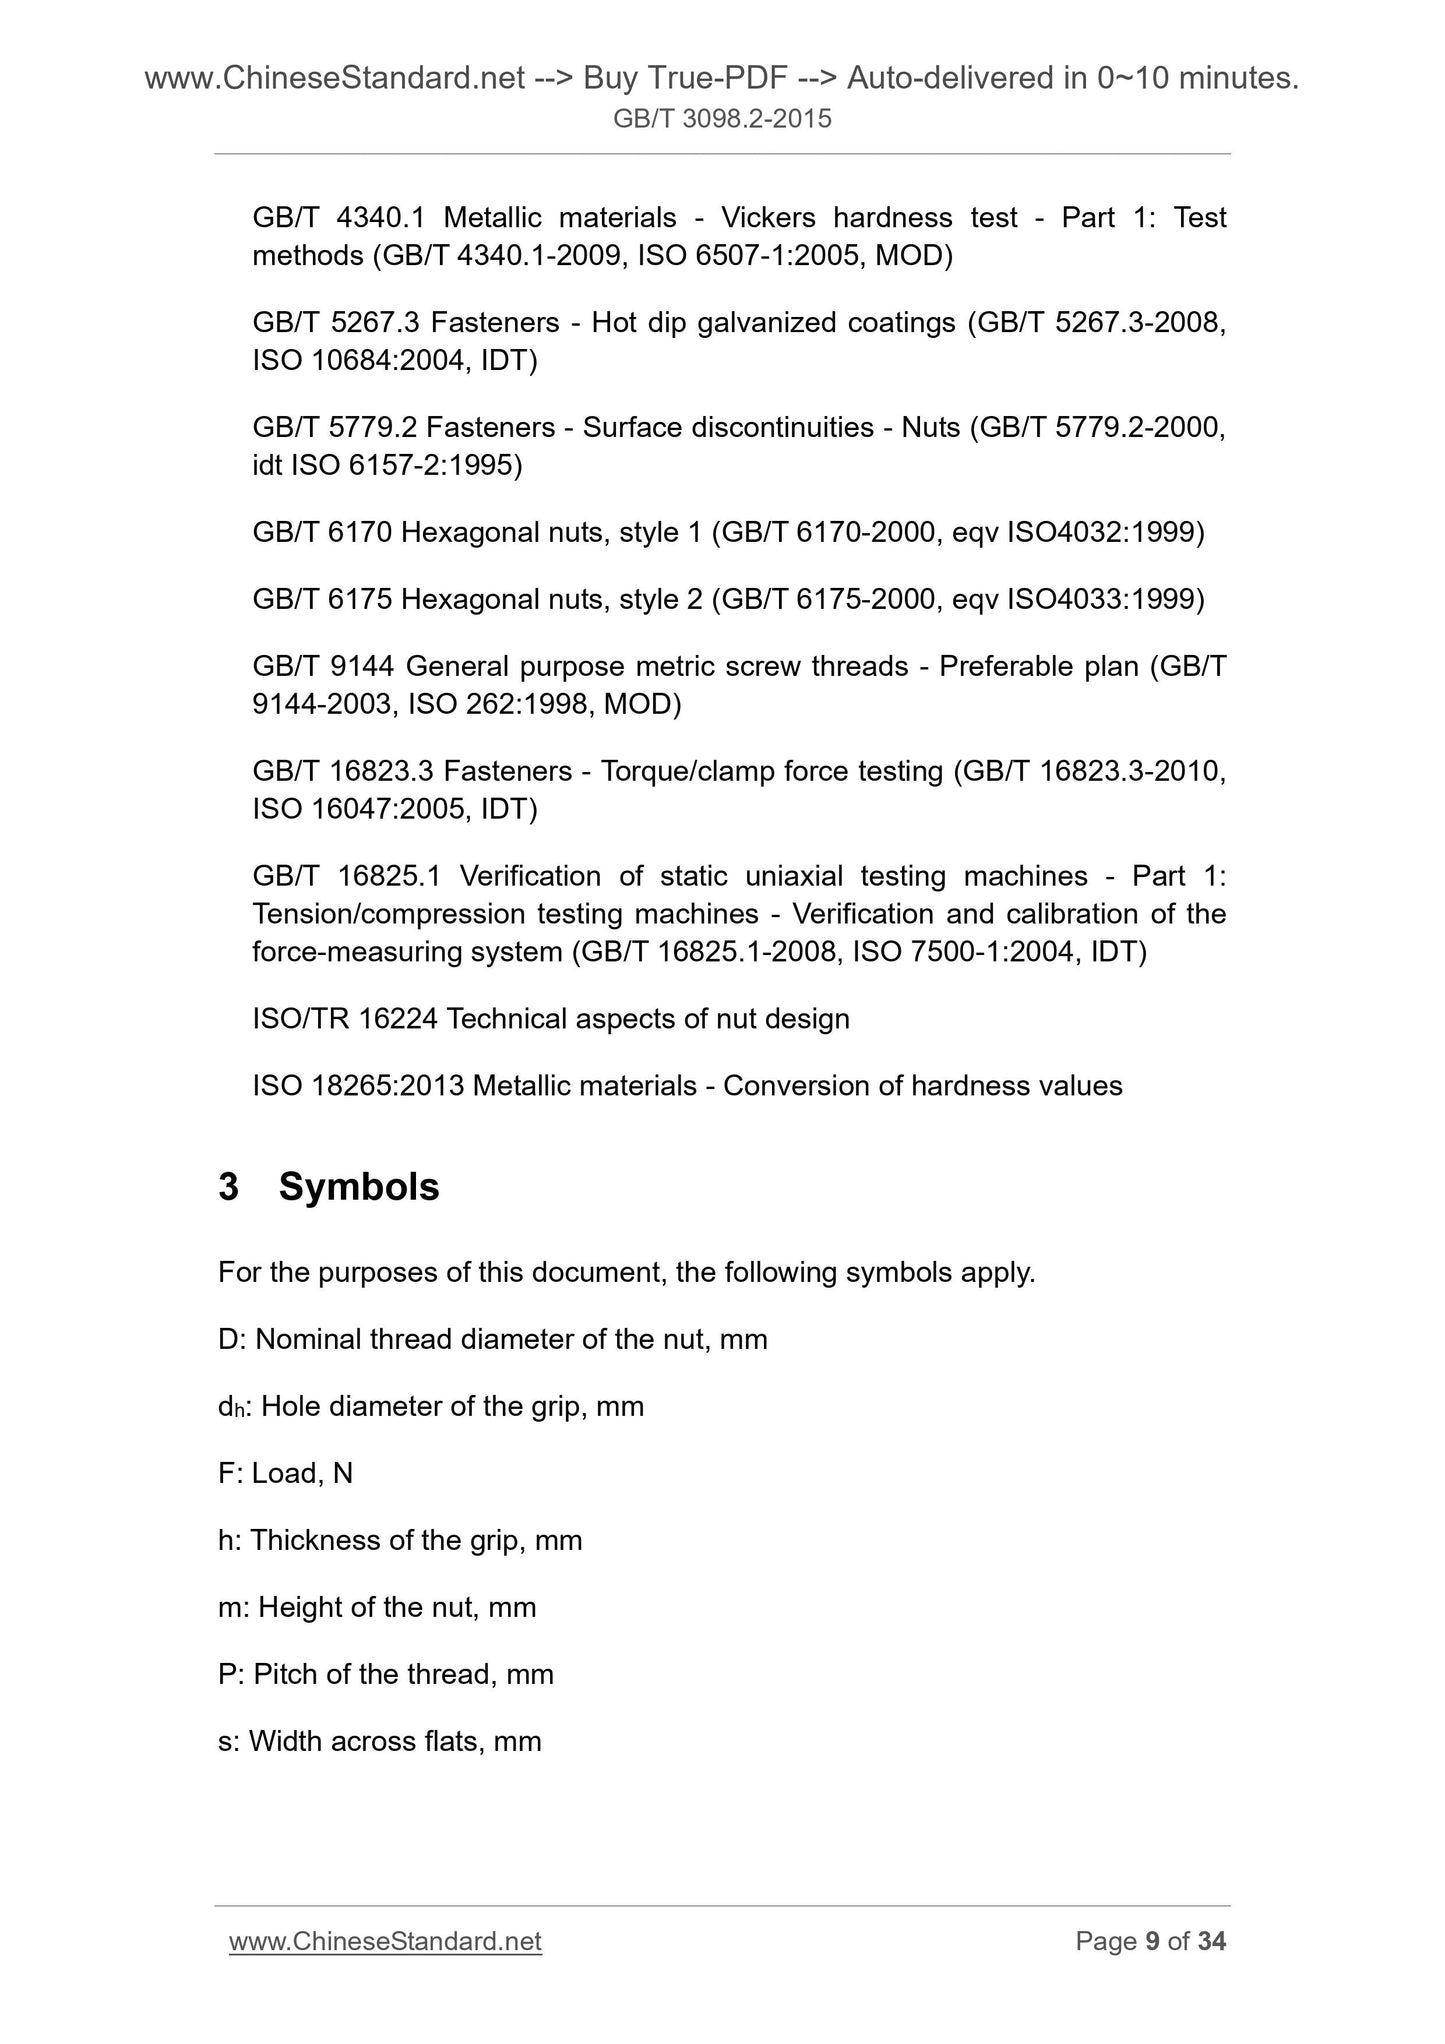 GB/T 3098.2-2015 Page 8